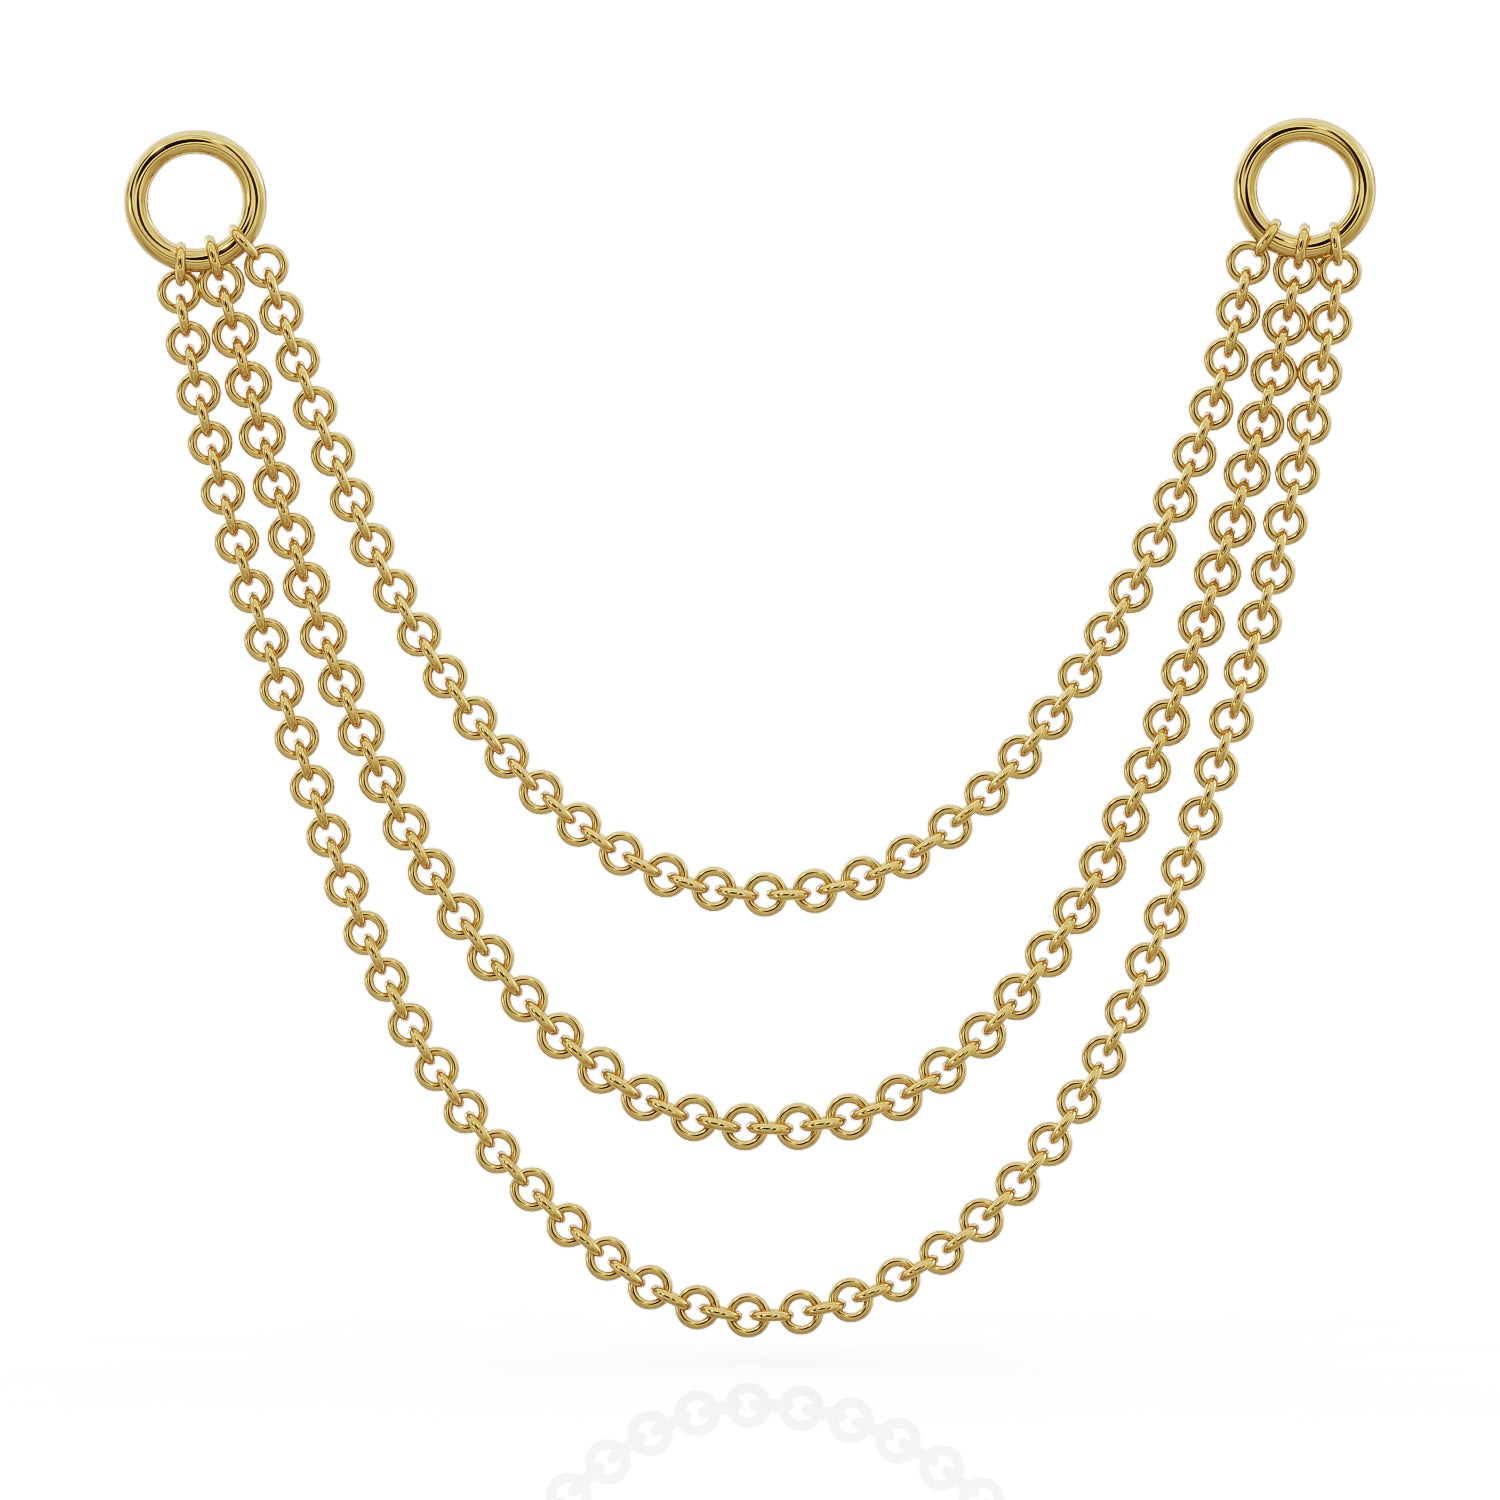 Three Link Chains Piercing Jewelry Add-on Accessory-Yellow Gold   36mm